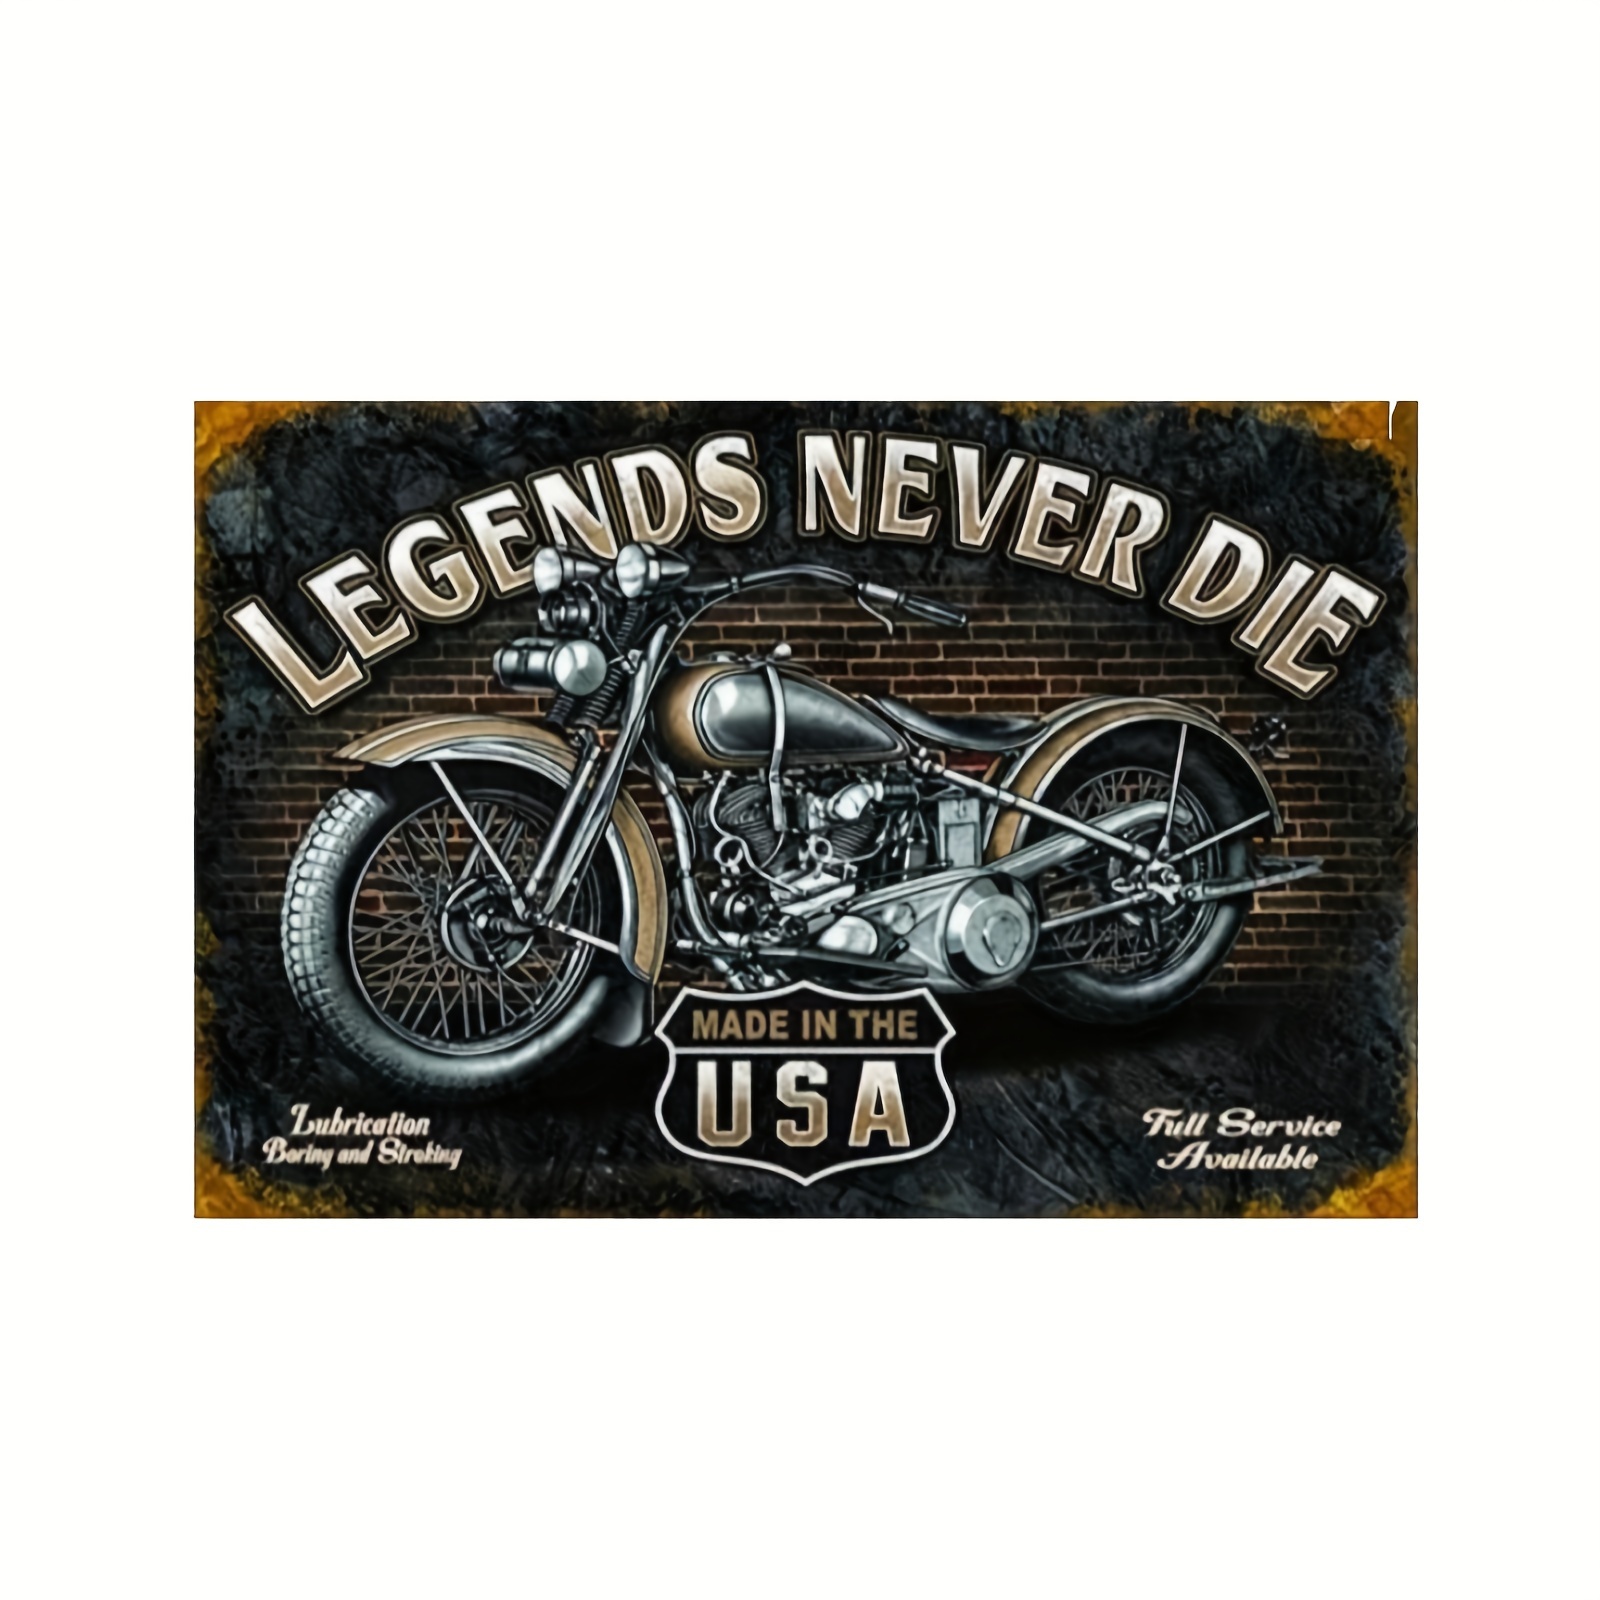 

ride Forever" Legends Never Die" Motorcycle Tin Sign - Perfect For Harley Davidson Fans, Man Cave Decor, 8x12 Inches